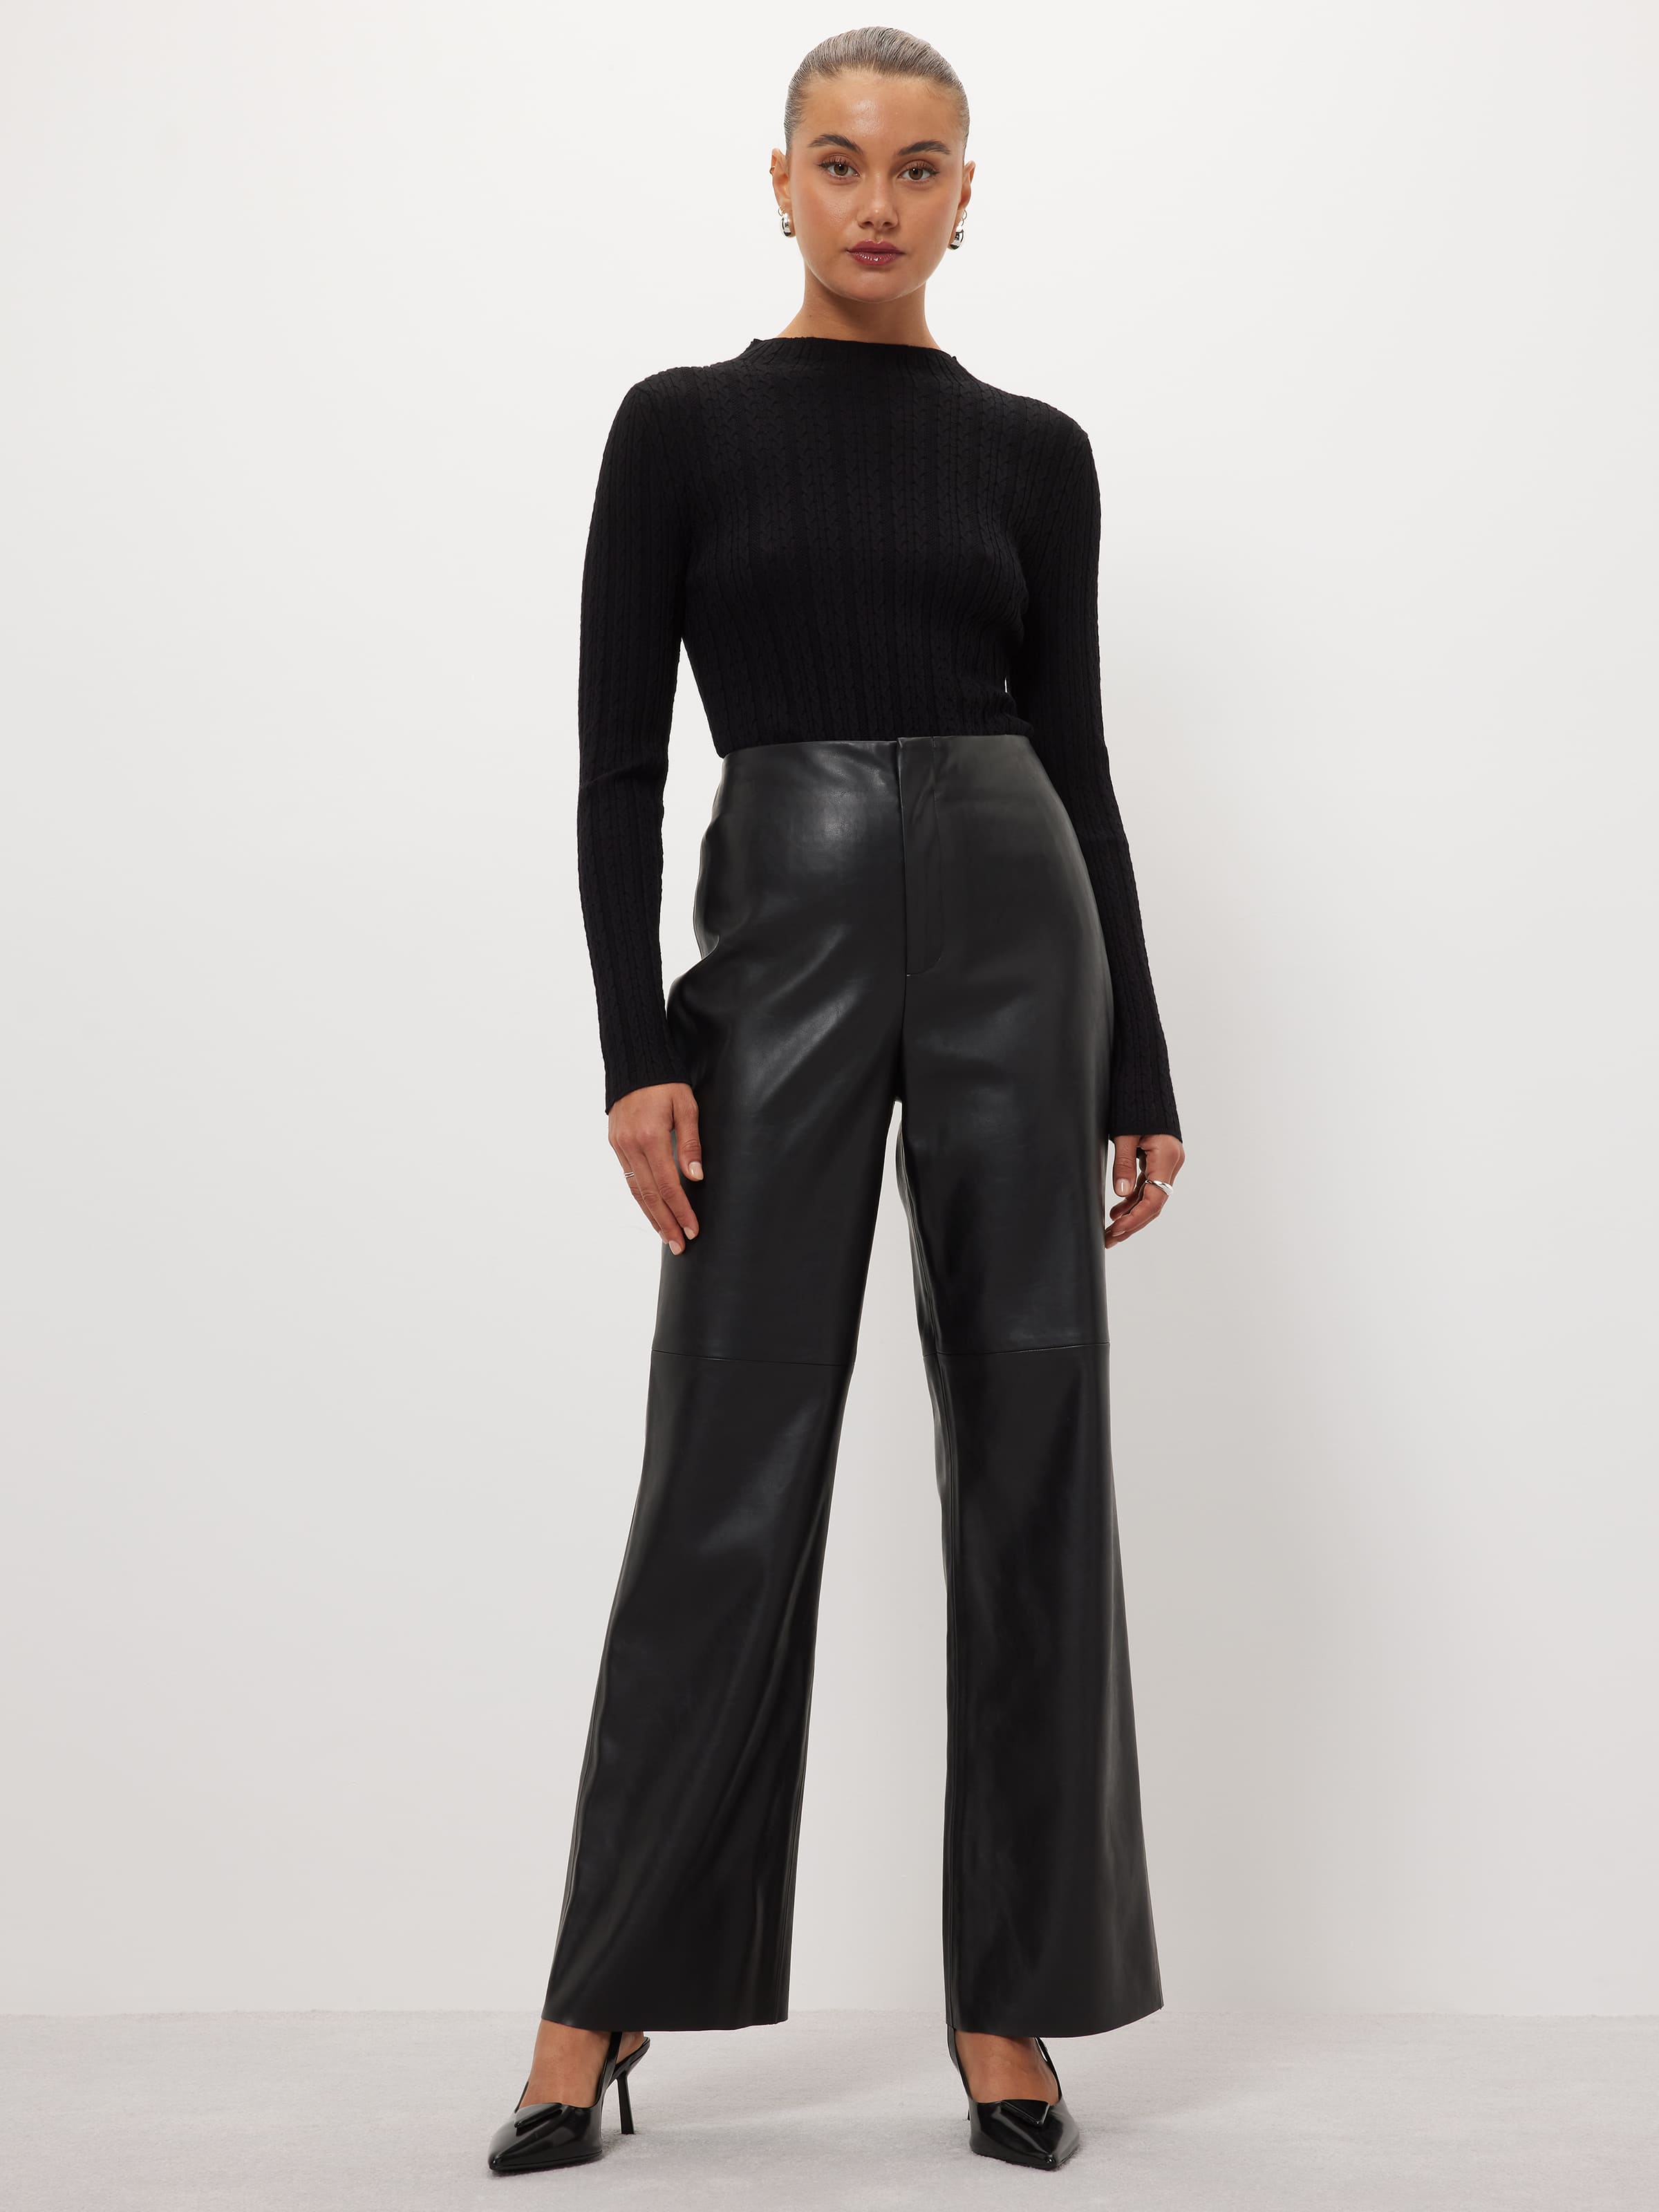 Presley Faux Leather Pant